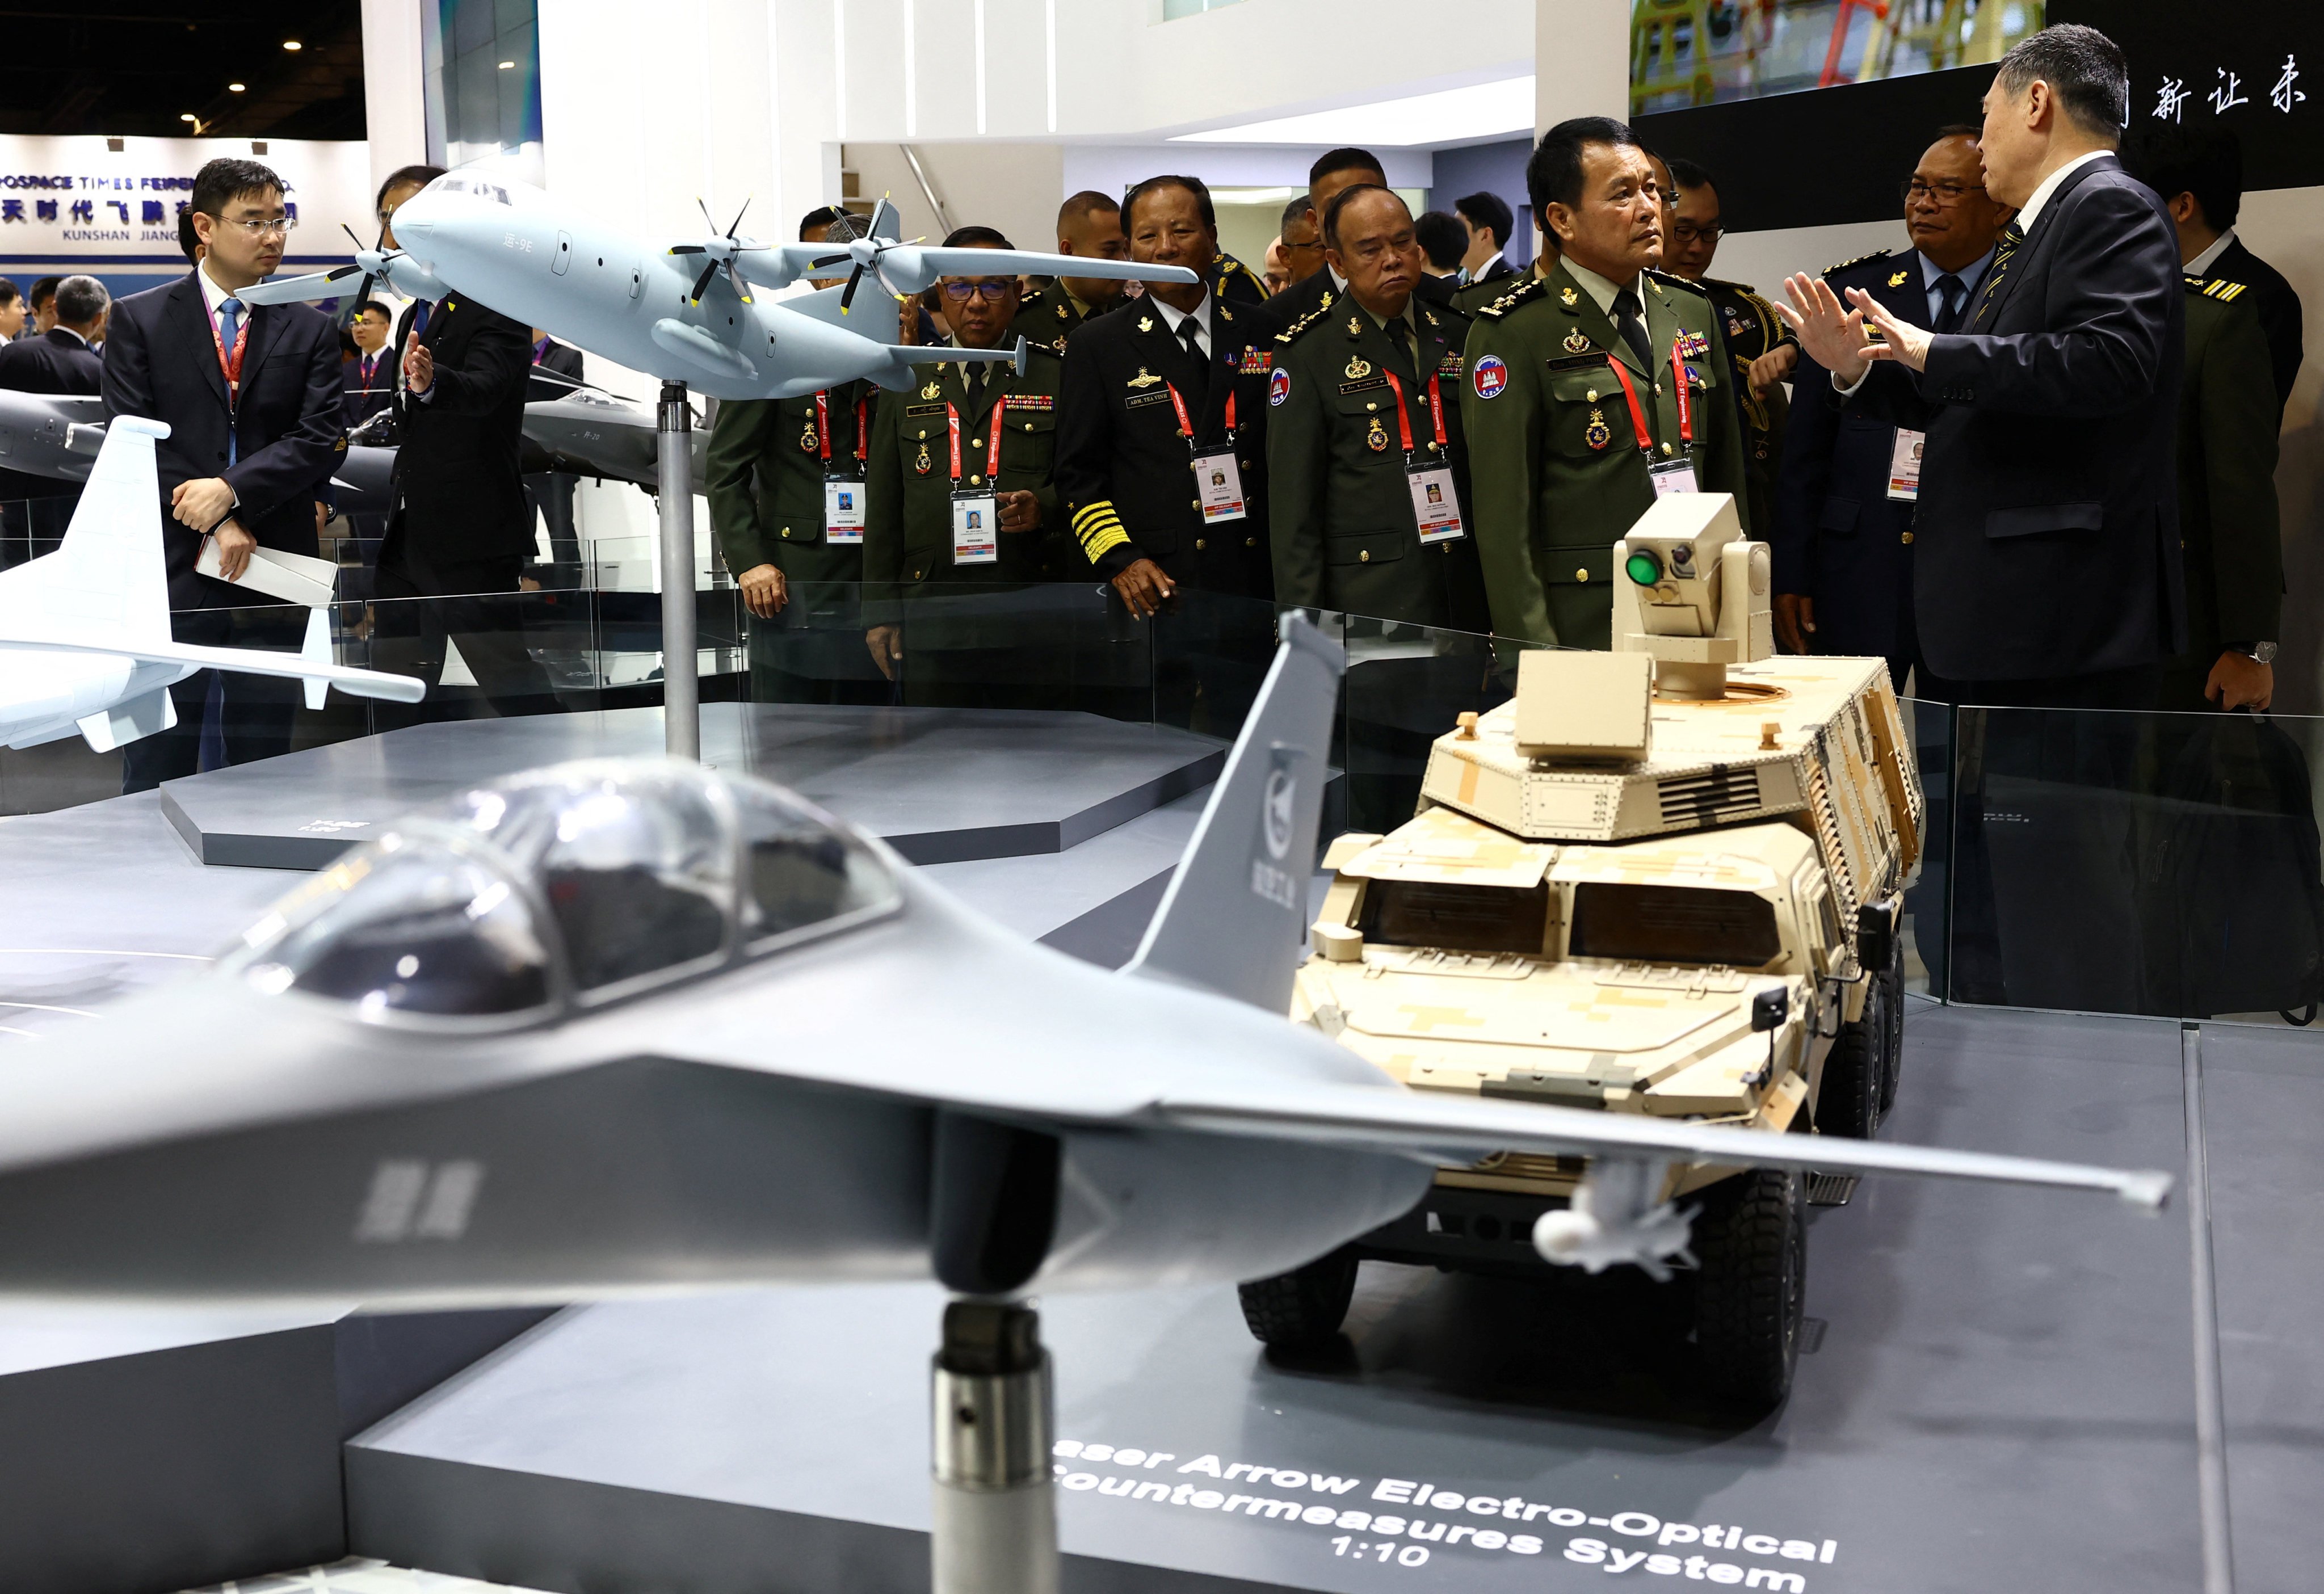 China’s Aviation Industry Corporation booth shows off military technology at the Singapore Airshow last month. Photo: Reuters